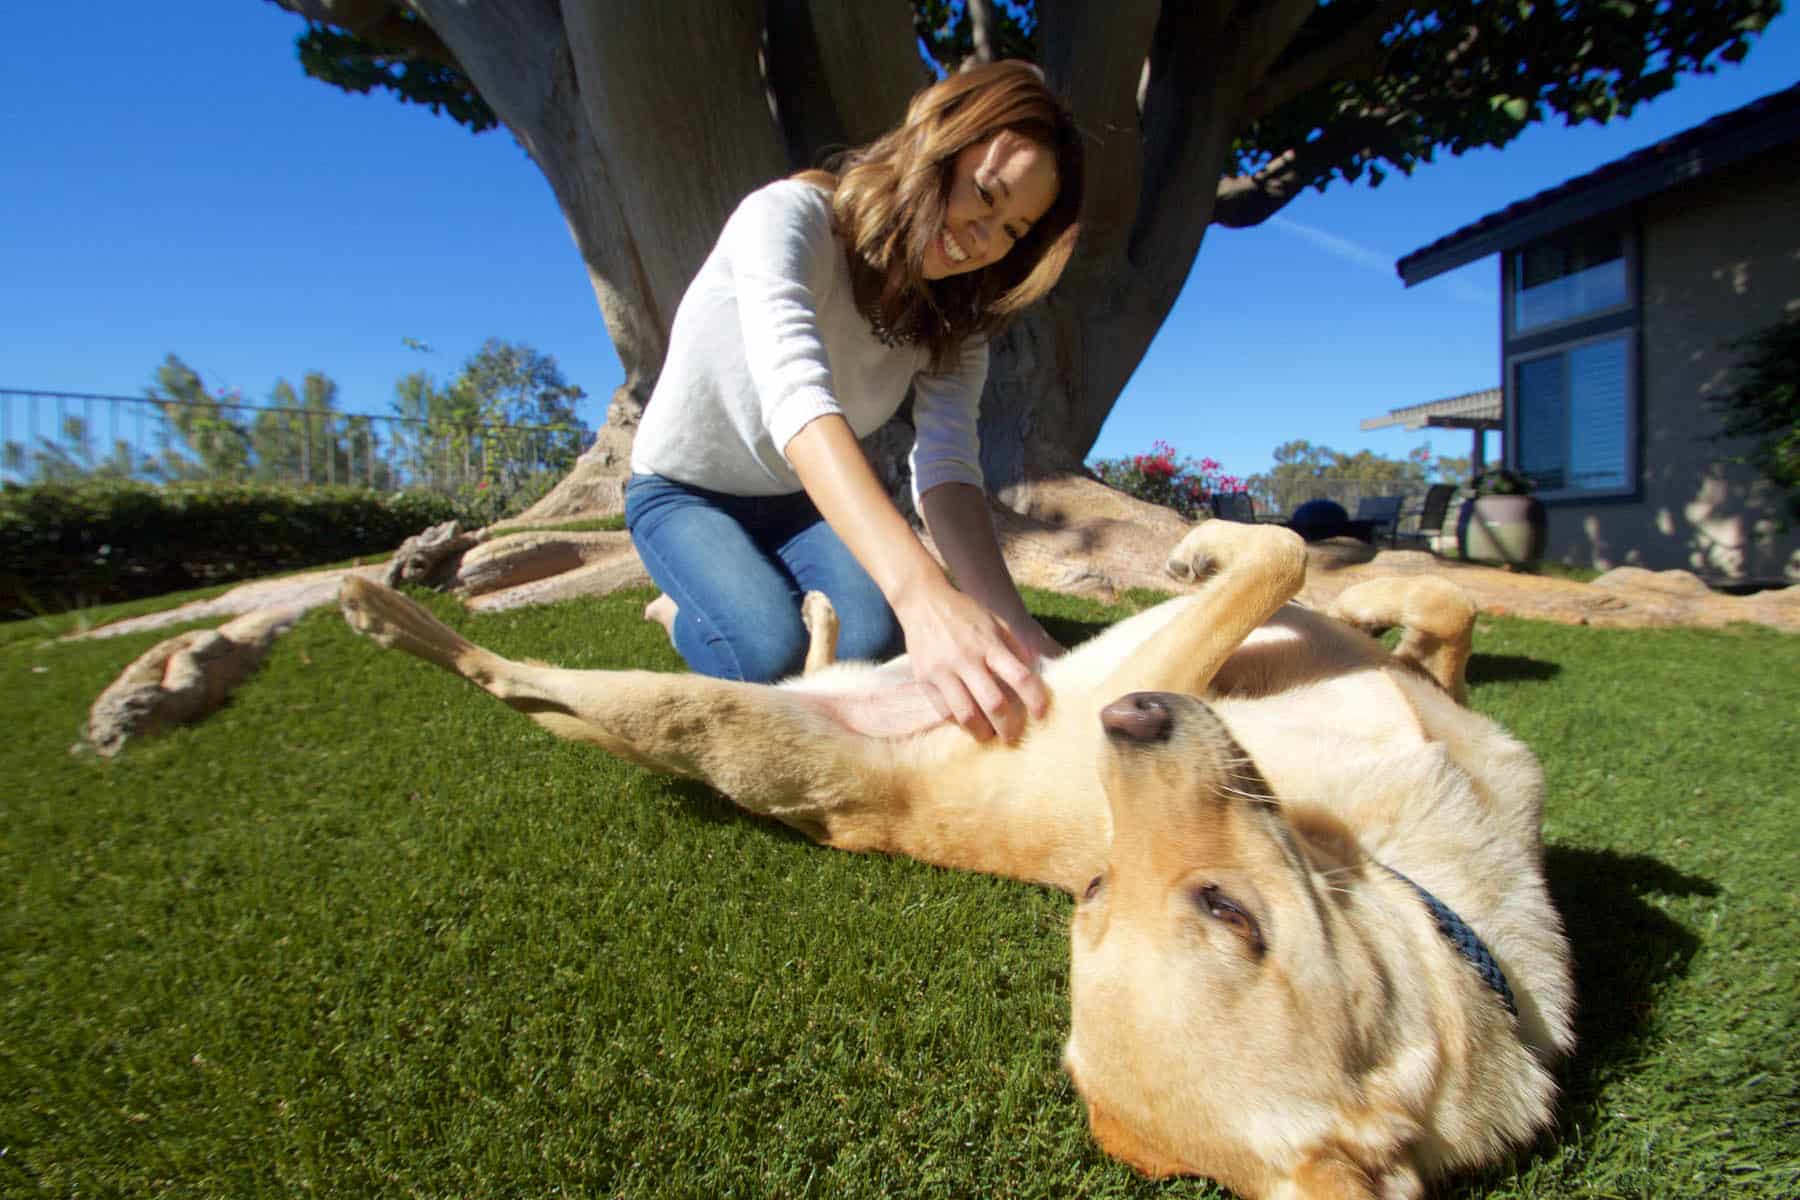 Dog and owner playing on artificial grass